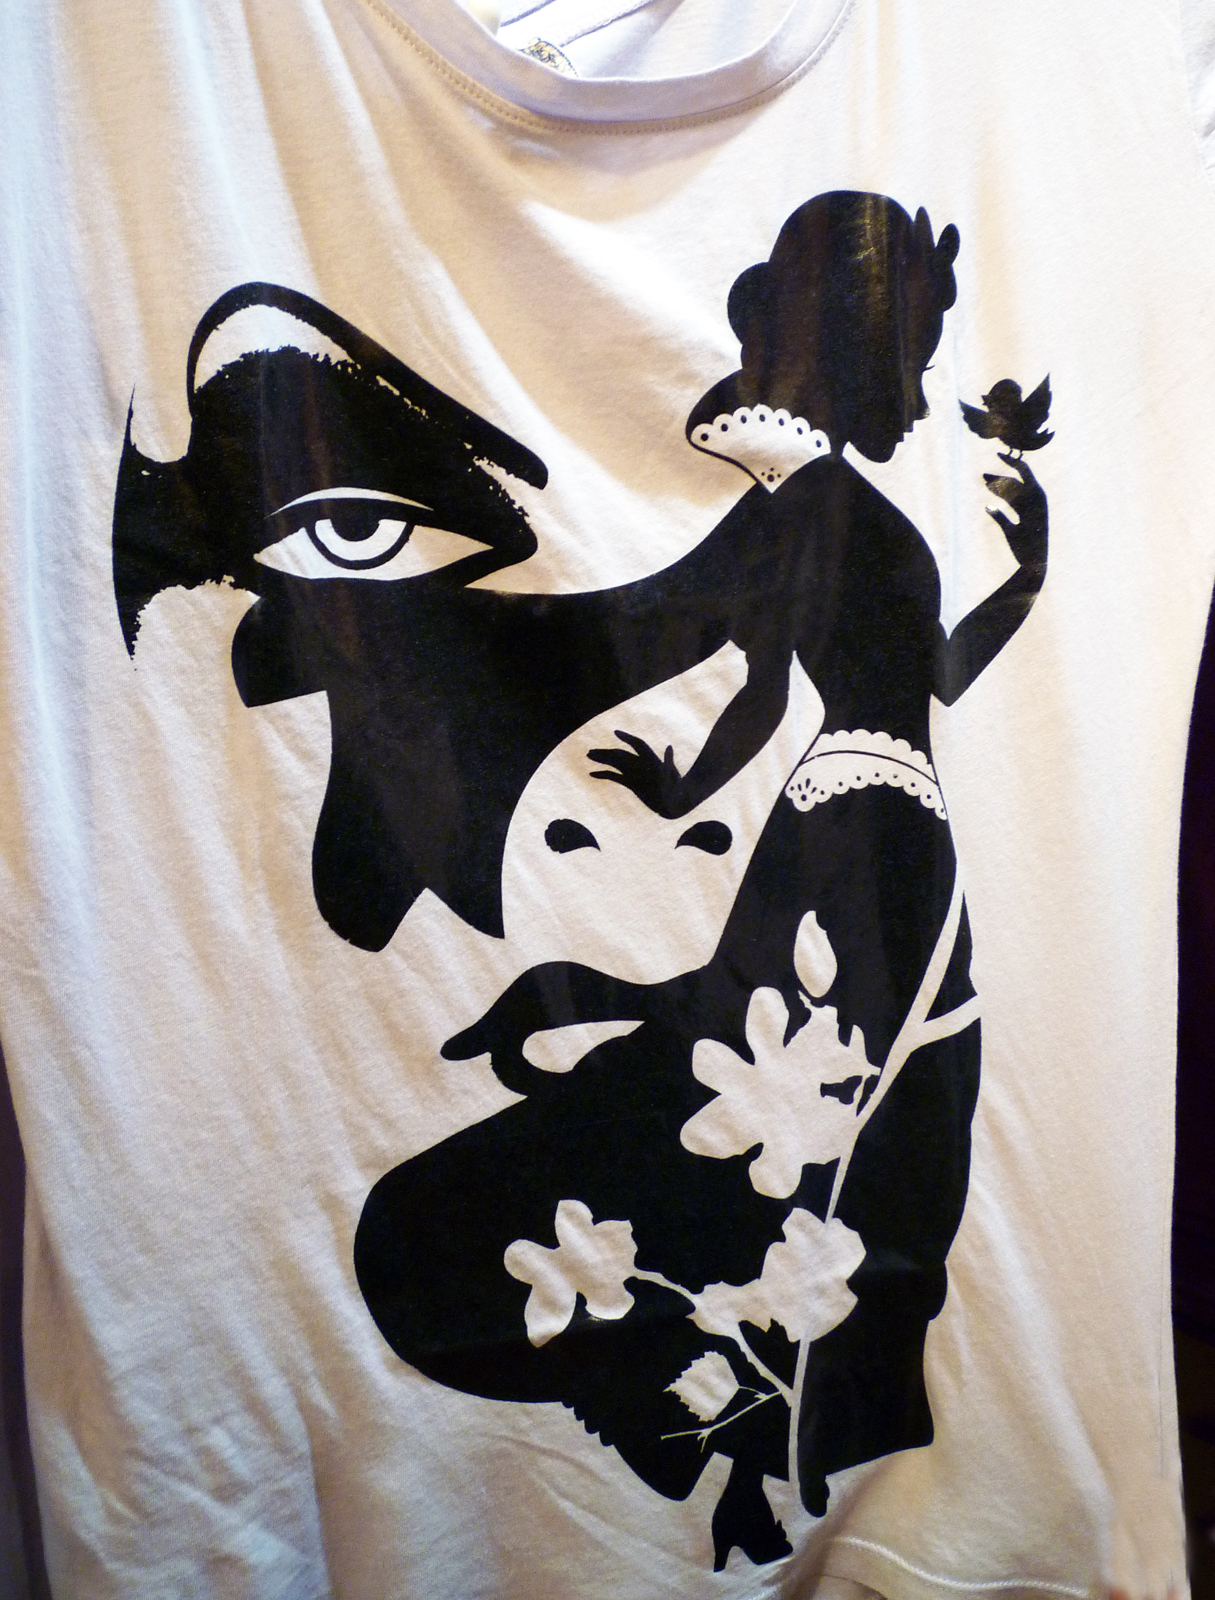 Download Filmic Light - Snow White Archive: Snow White Silhouette Tee